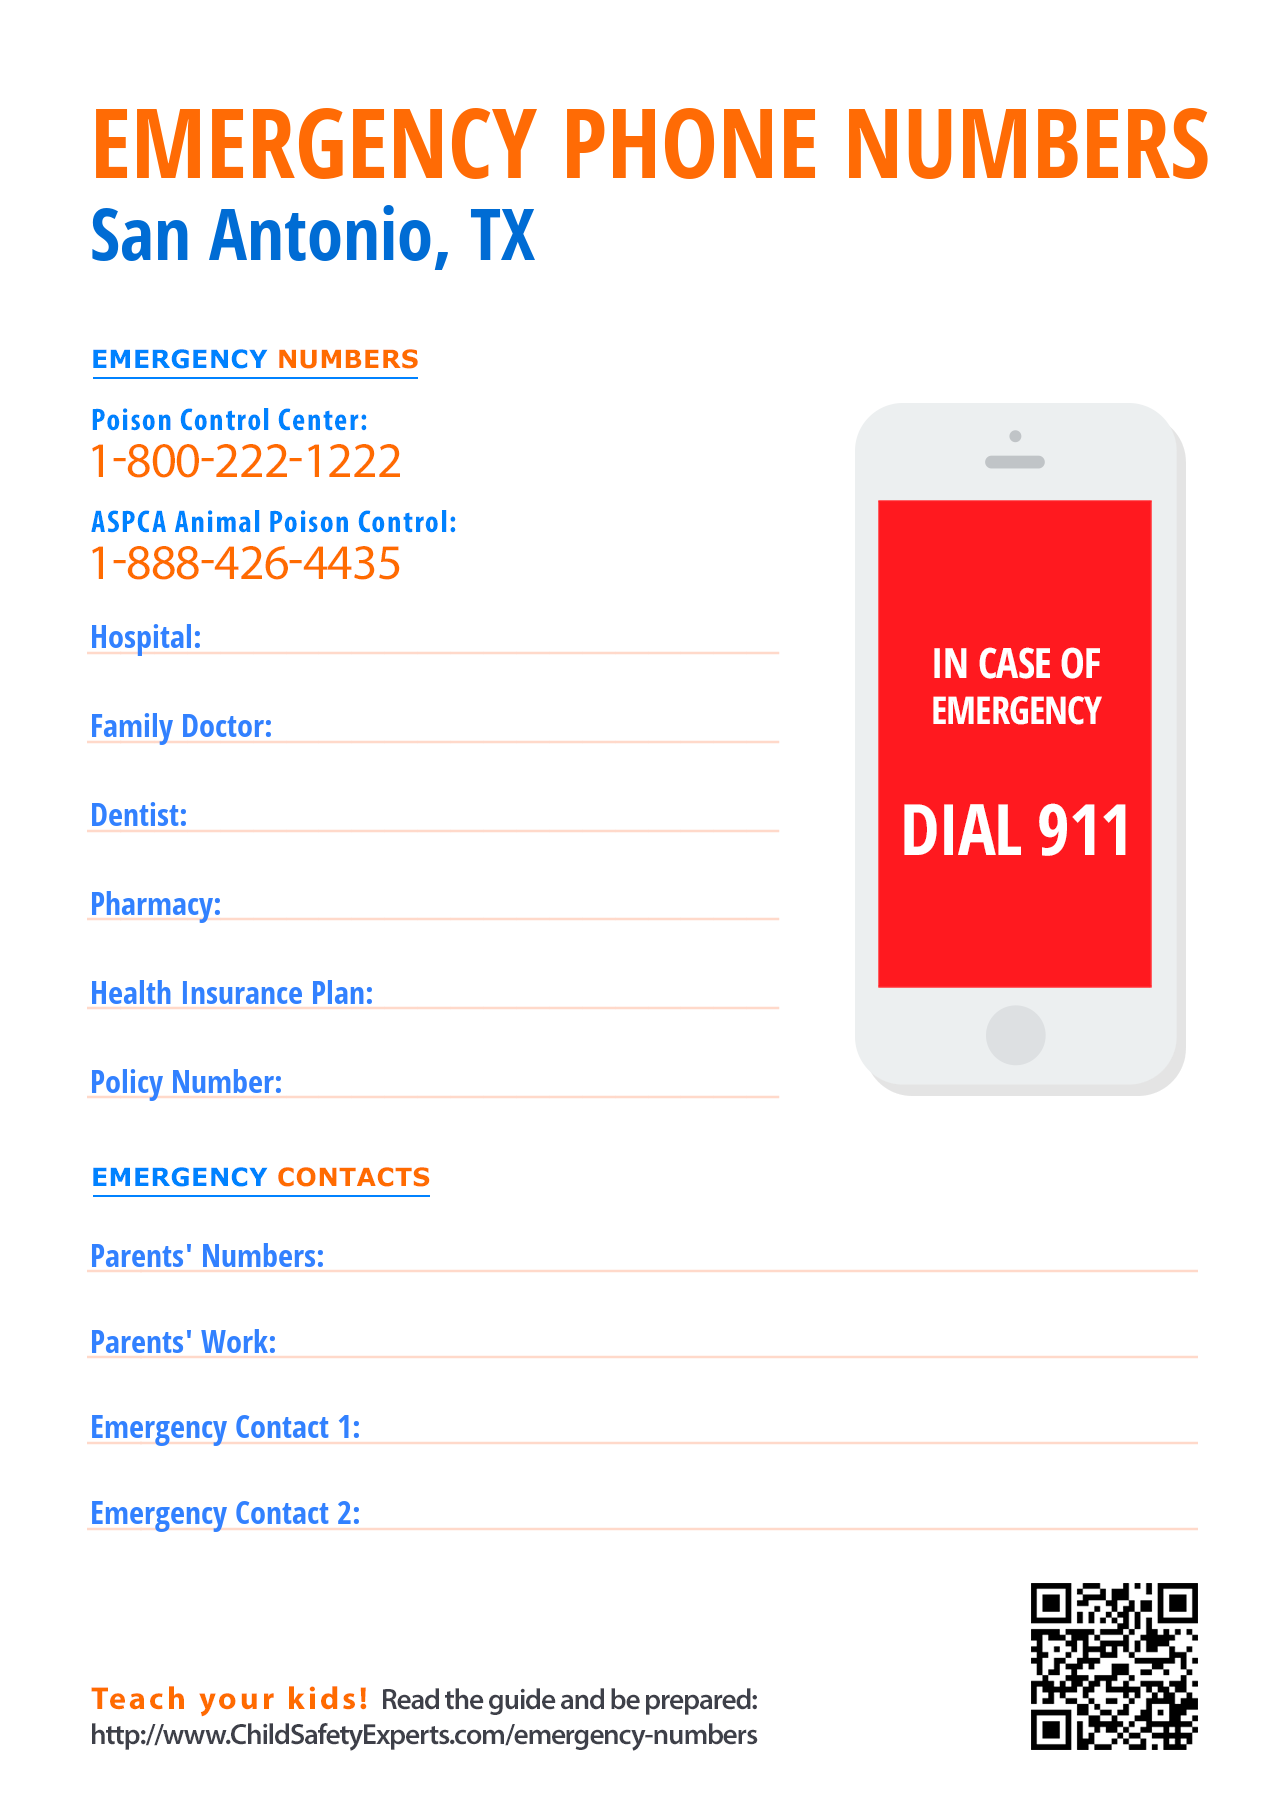 Important Emergency Phone Numbers - Print and hang on the fridge